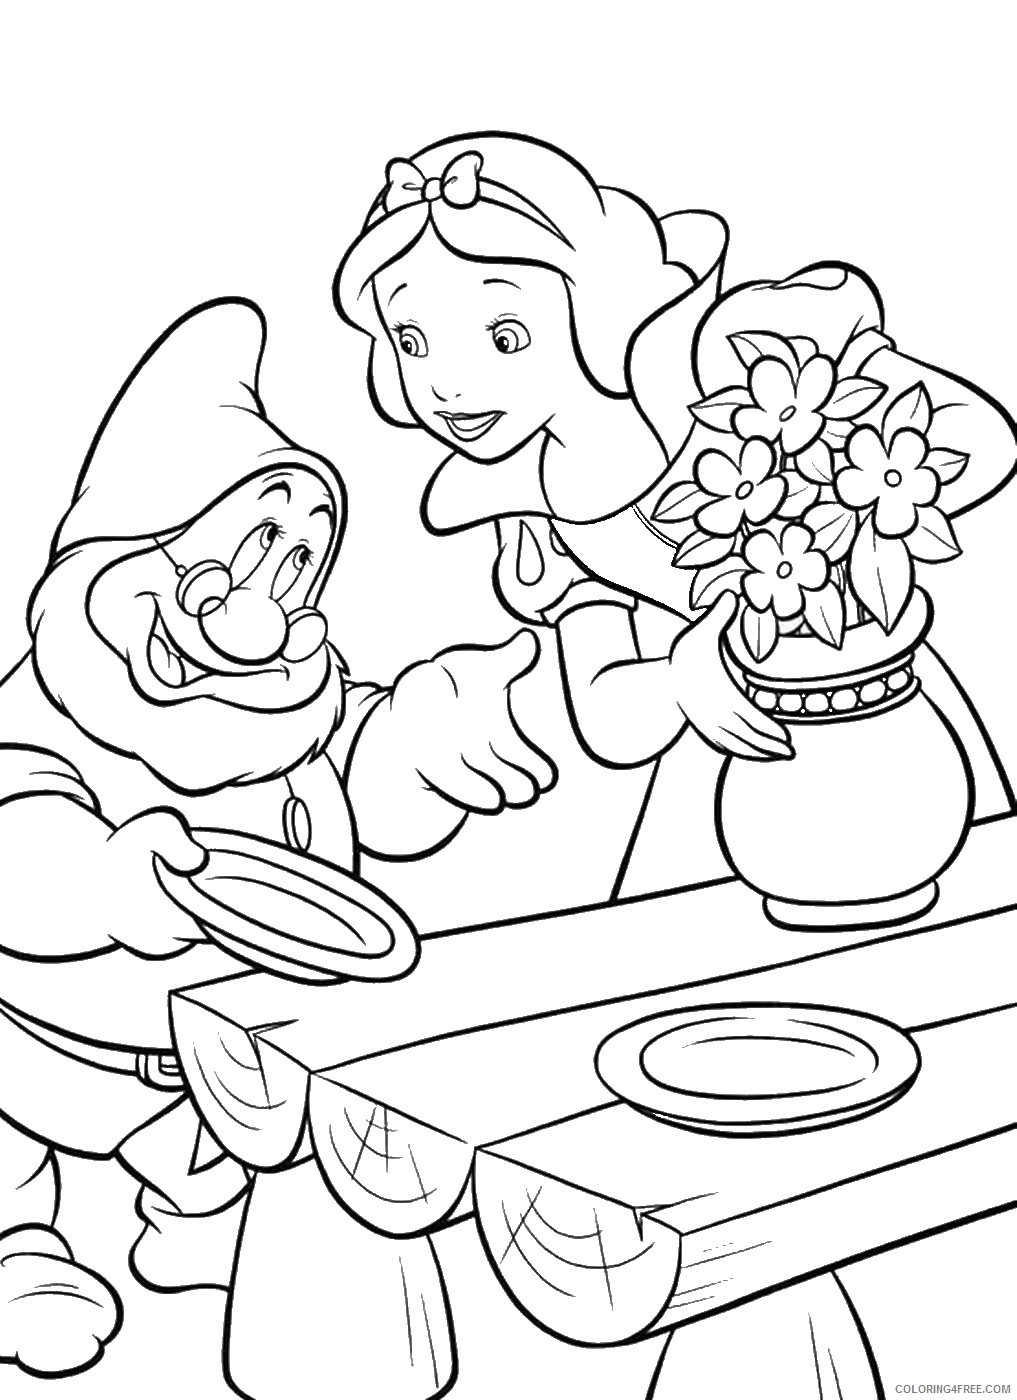 Snow White Coloring Pages Cartoons snow_white_cl_82 Printable 2020 5757 Coloring4free